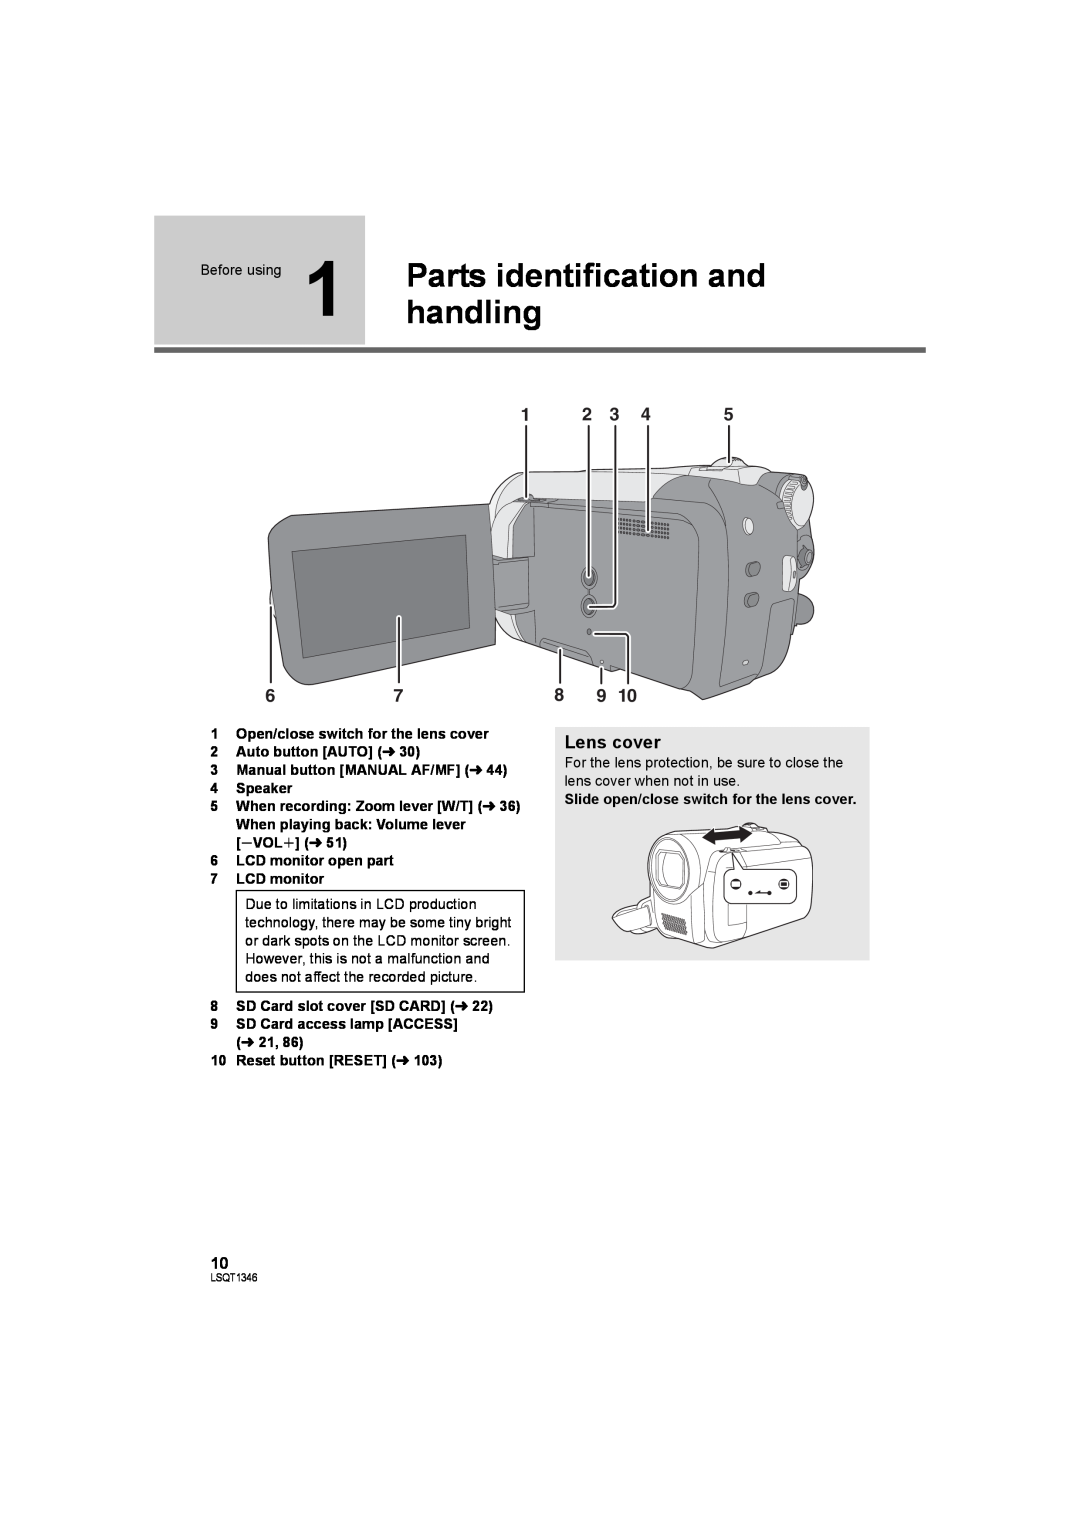 Panasonic SDR-H50 Parts identification and, handling, Lens cover, Before using, Manual button MANUAL AF/MF l 4 Speaker 